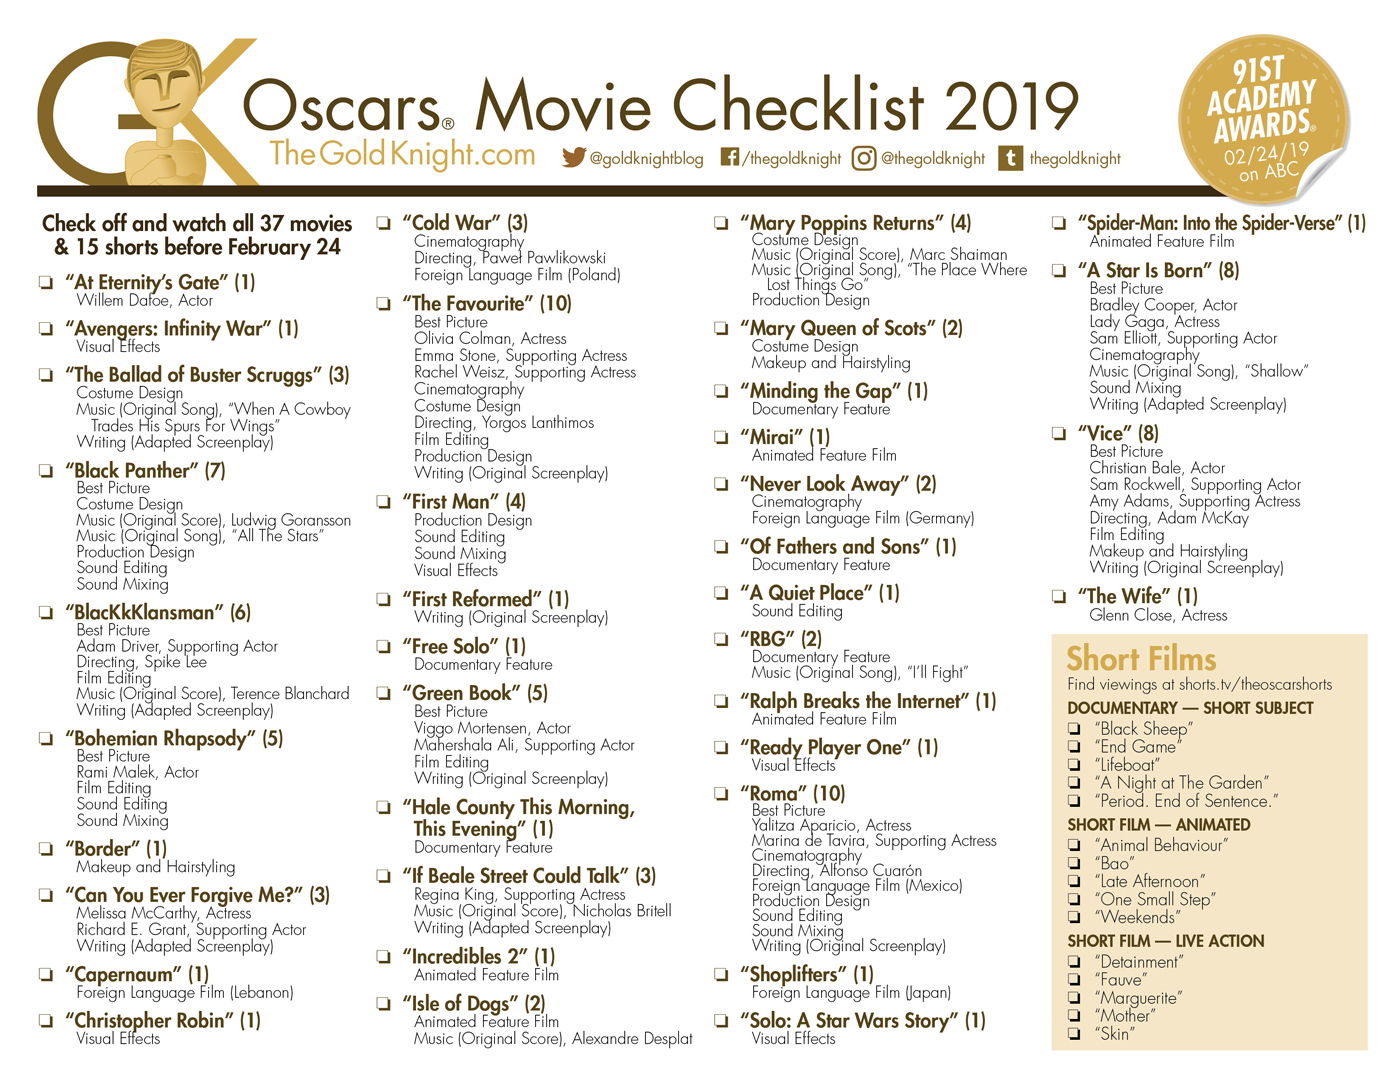 Oscars 2019: Download our printable movie checklist | The Gold Knight - Latest Academy ...